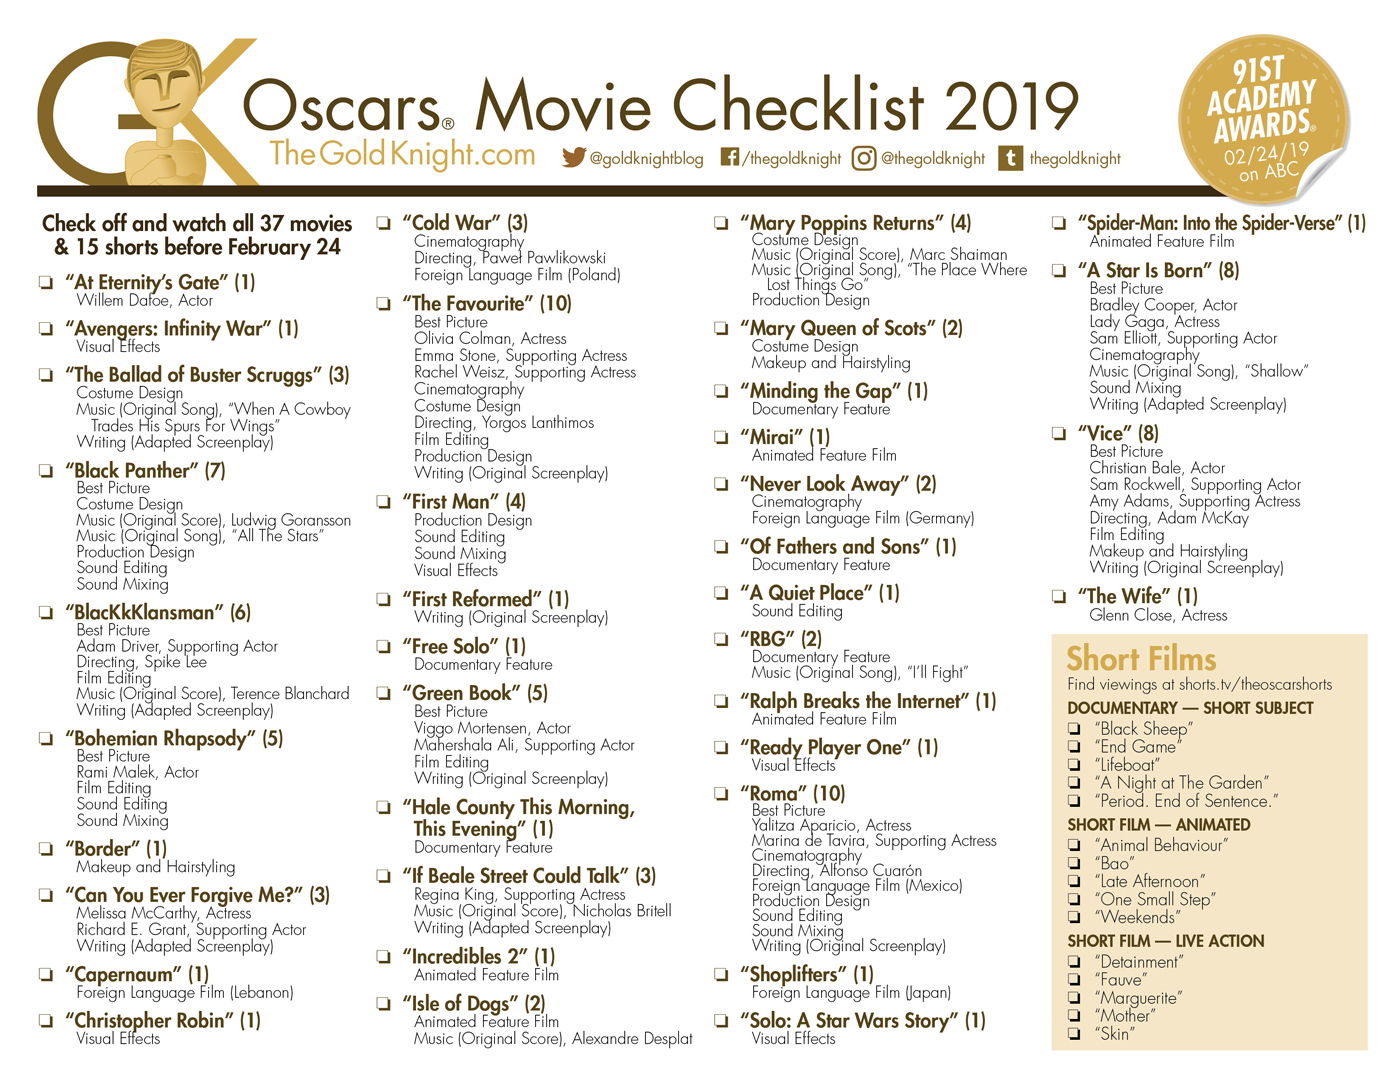 Oscars 2019: Download our printable movie checklist | The Gold Knight - Latest Academy ...